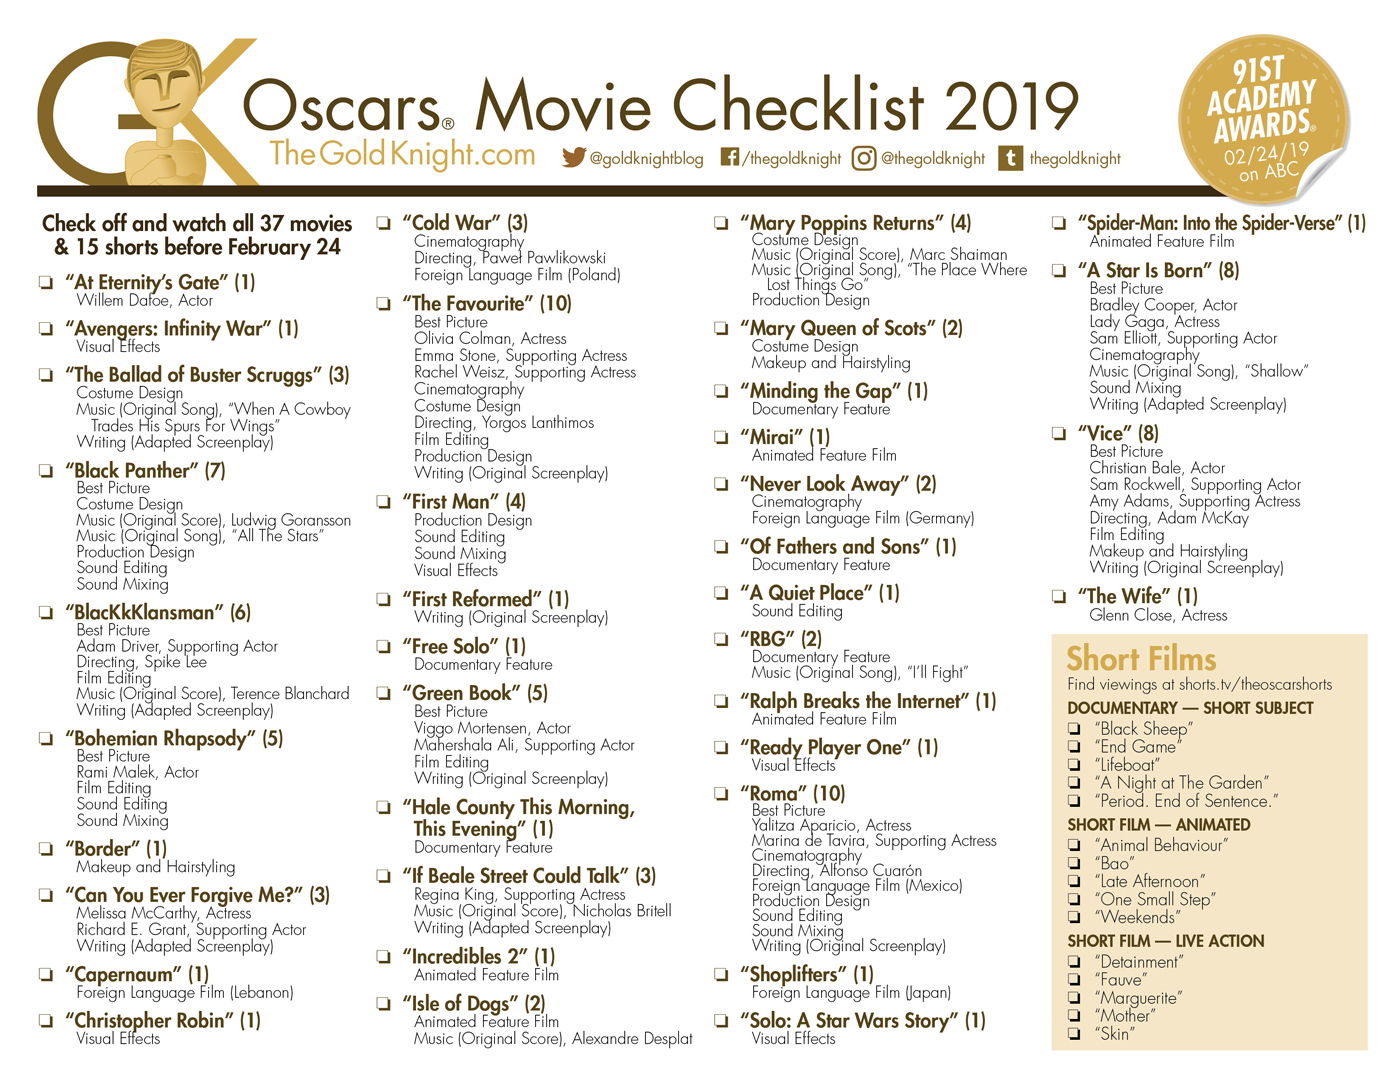 Oscars 2019: Download our printable movie checklist | The Gold Knight - Latest Academy ...